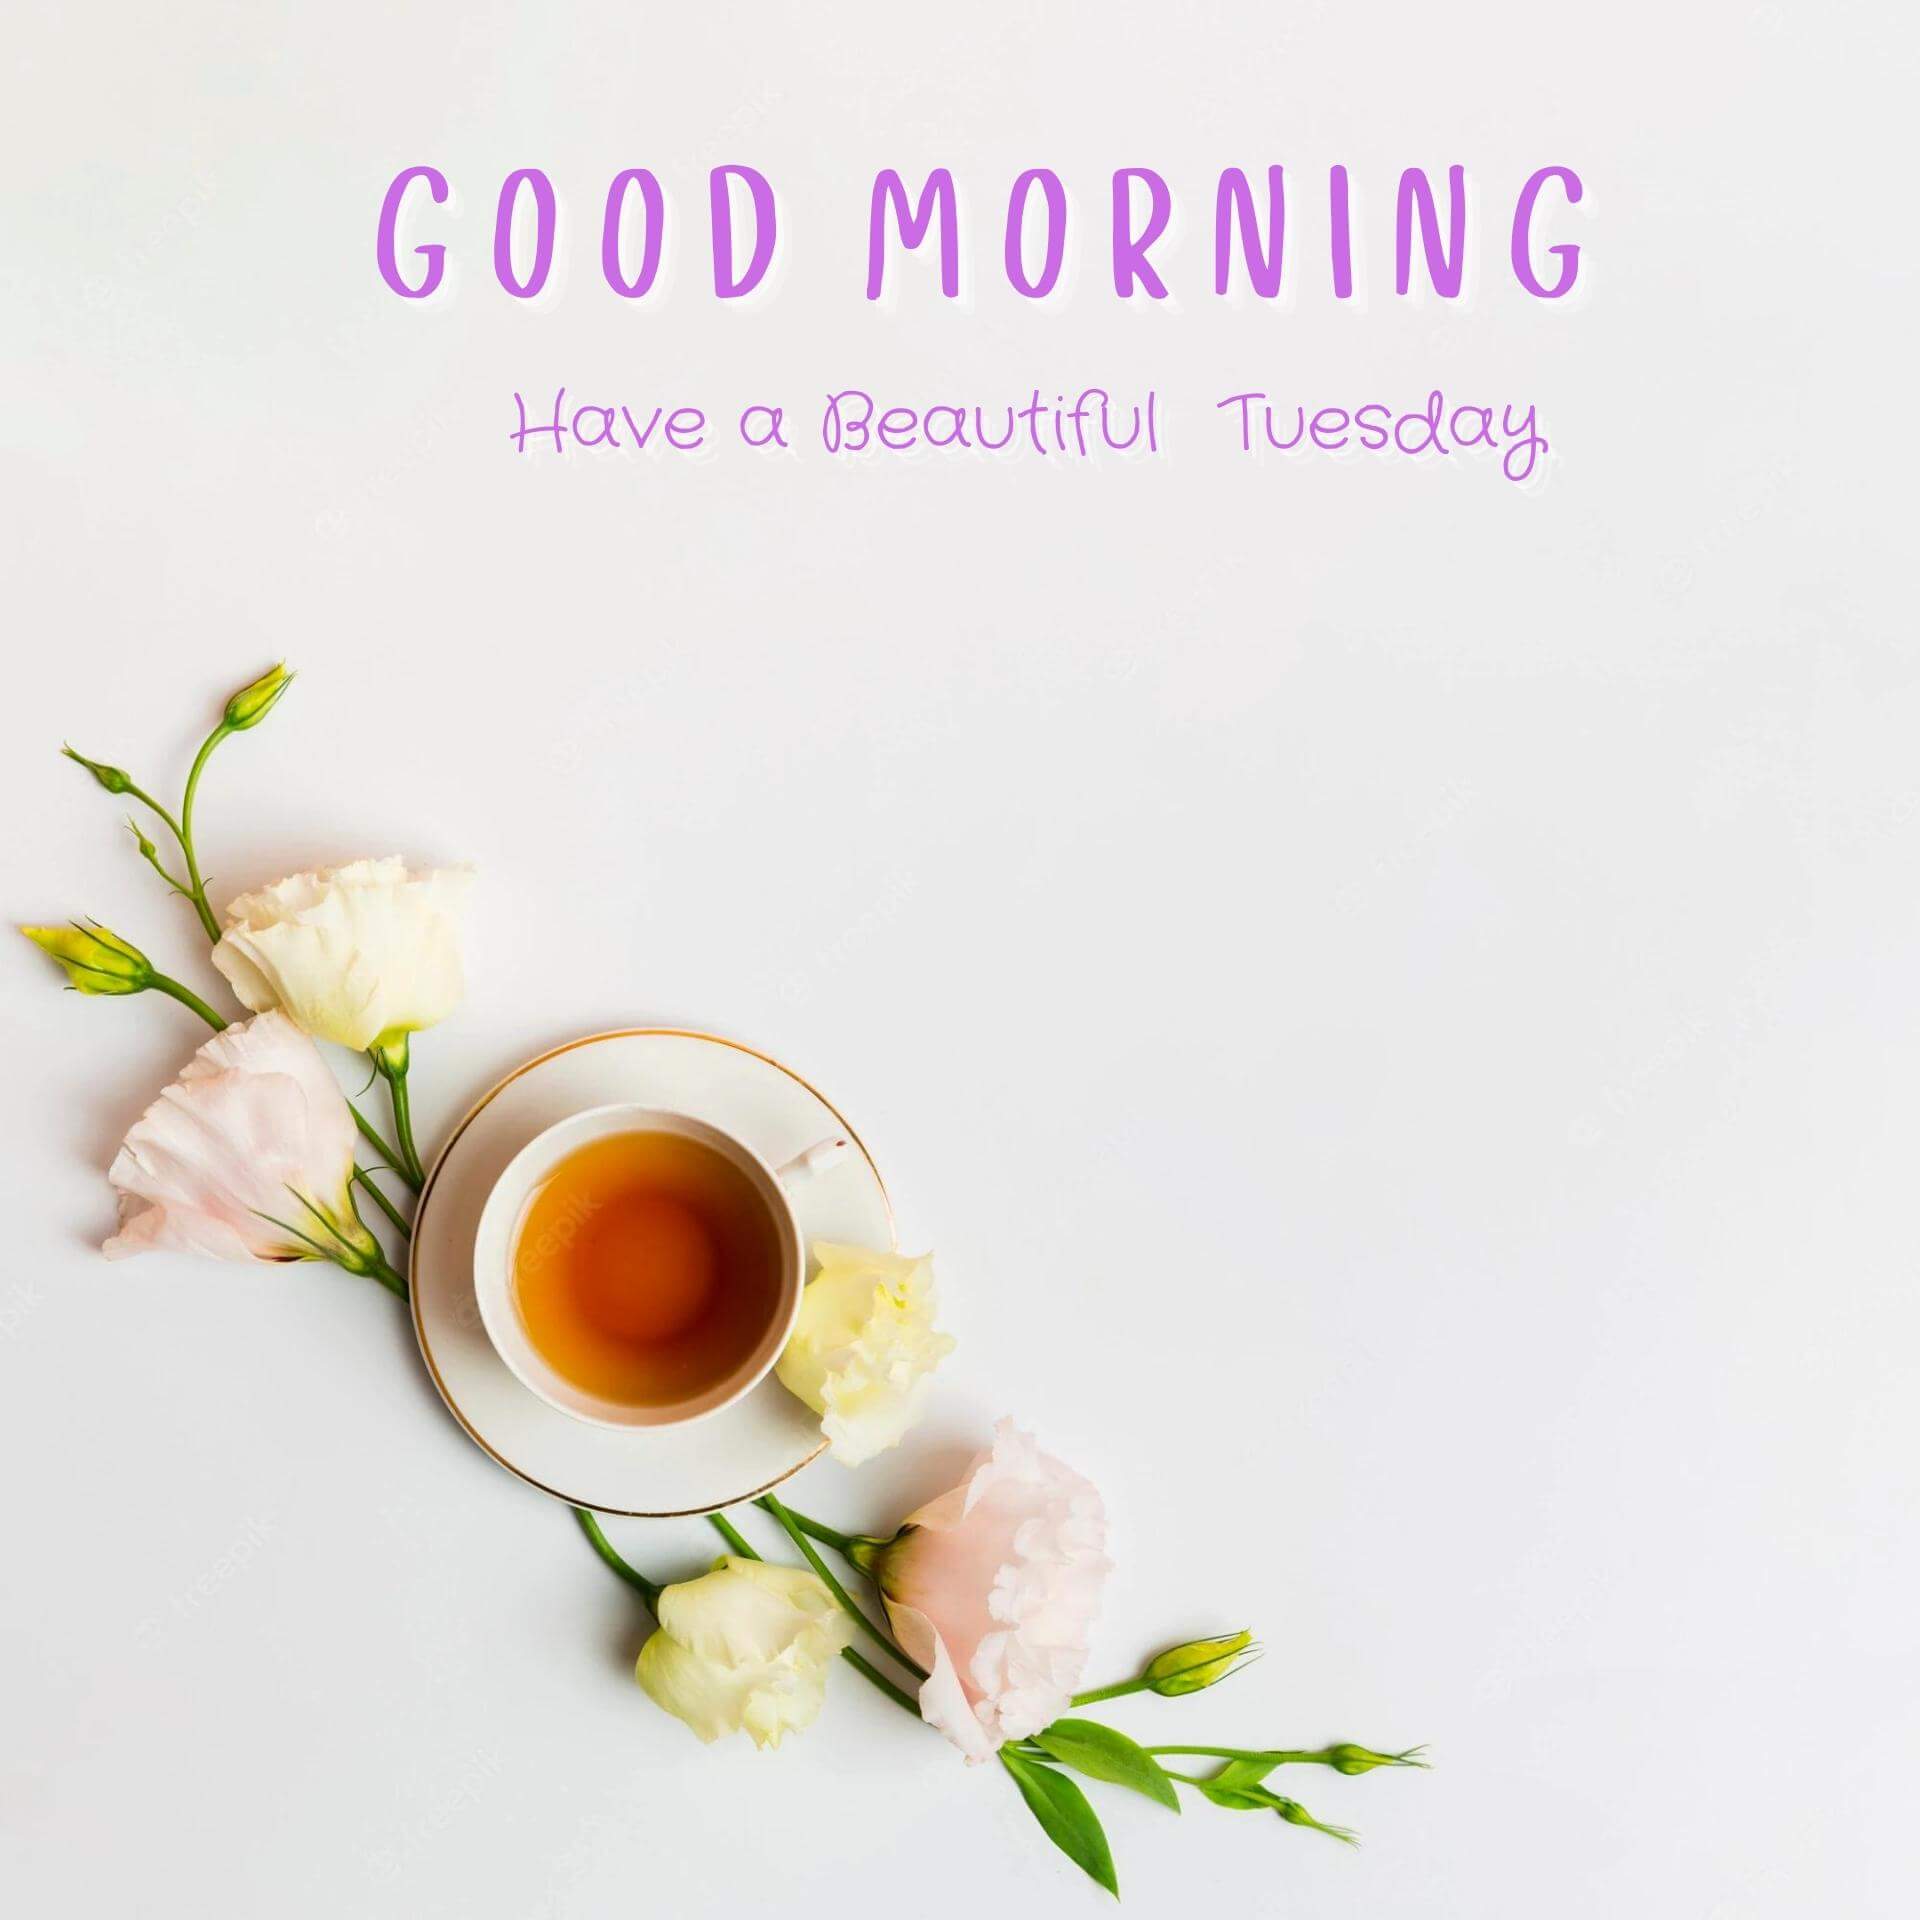 Tuesday good morning Wallpaper HD New Download